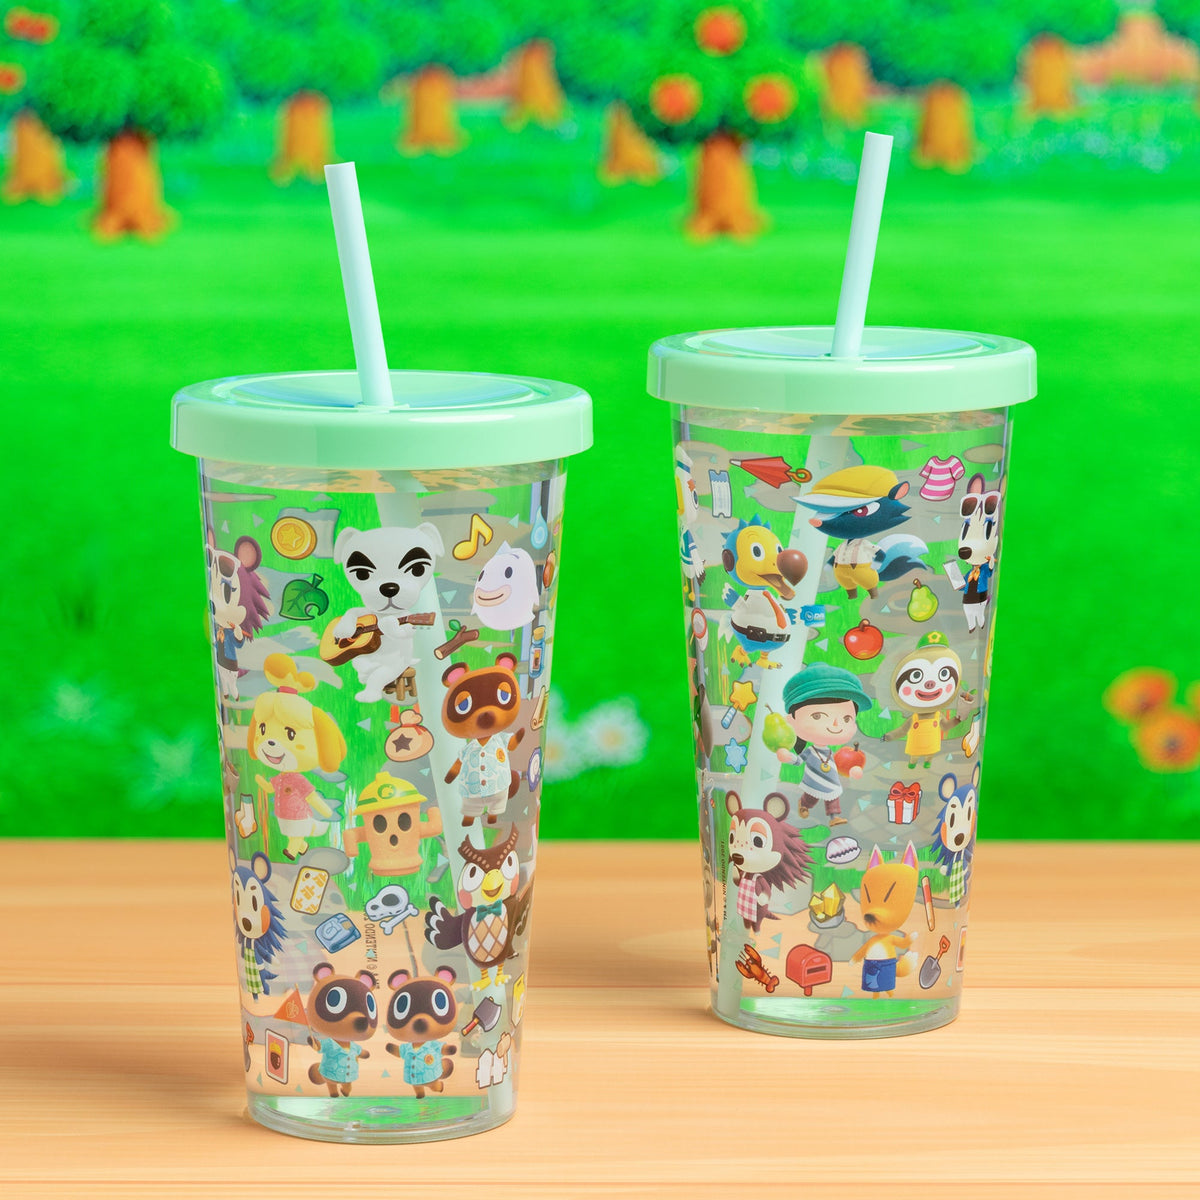 PALADONE PRODUCTS INC. Novelties Animal Crossing Plastic Cup With Straw 5055964766443